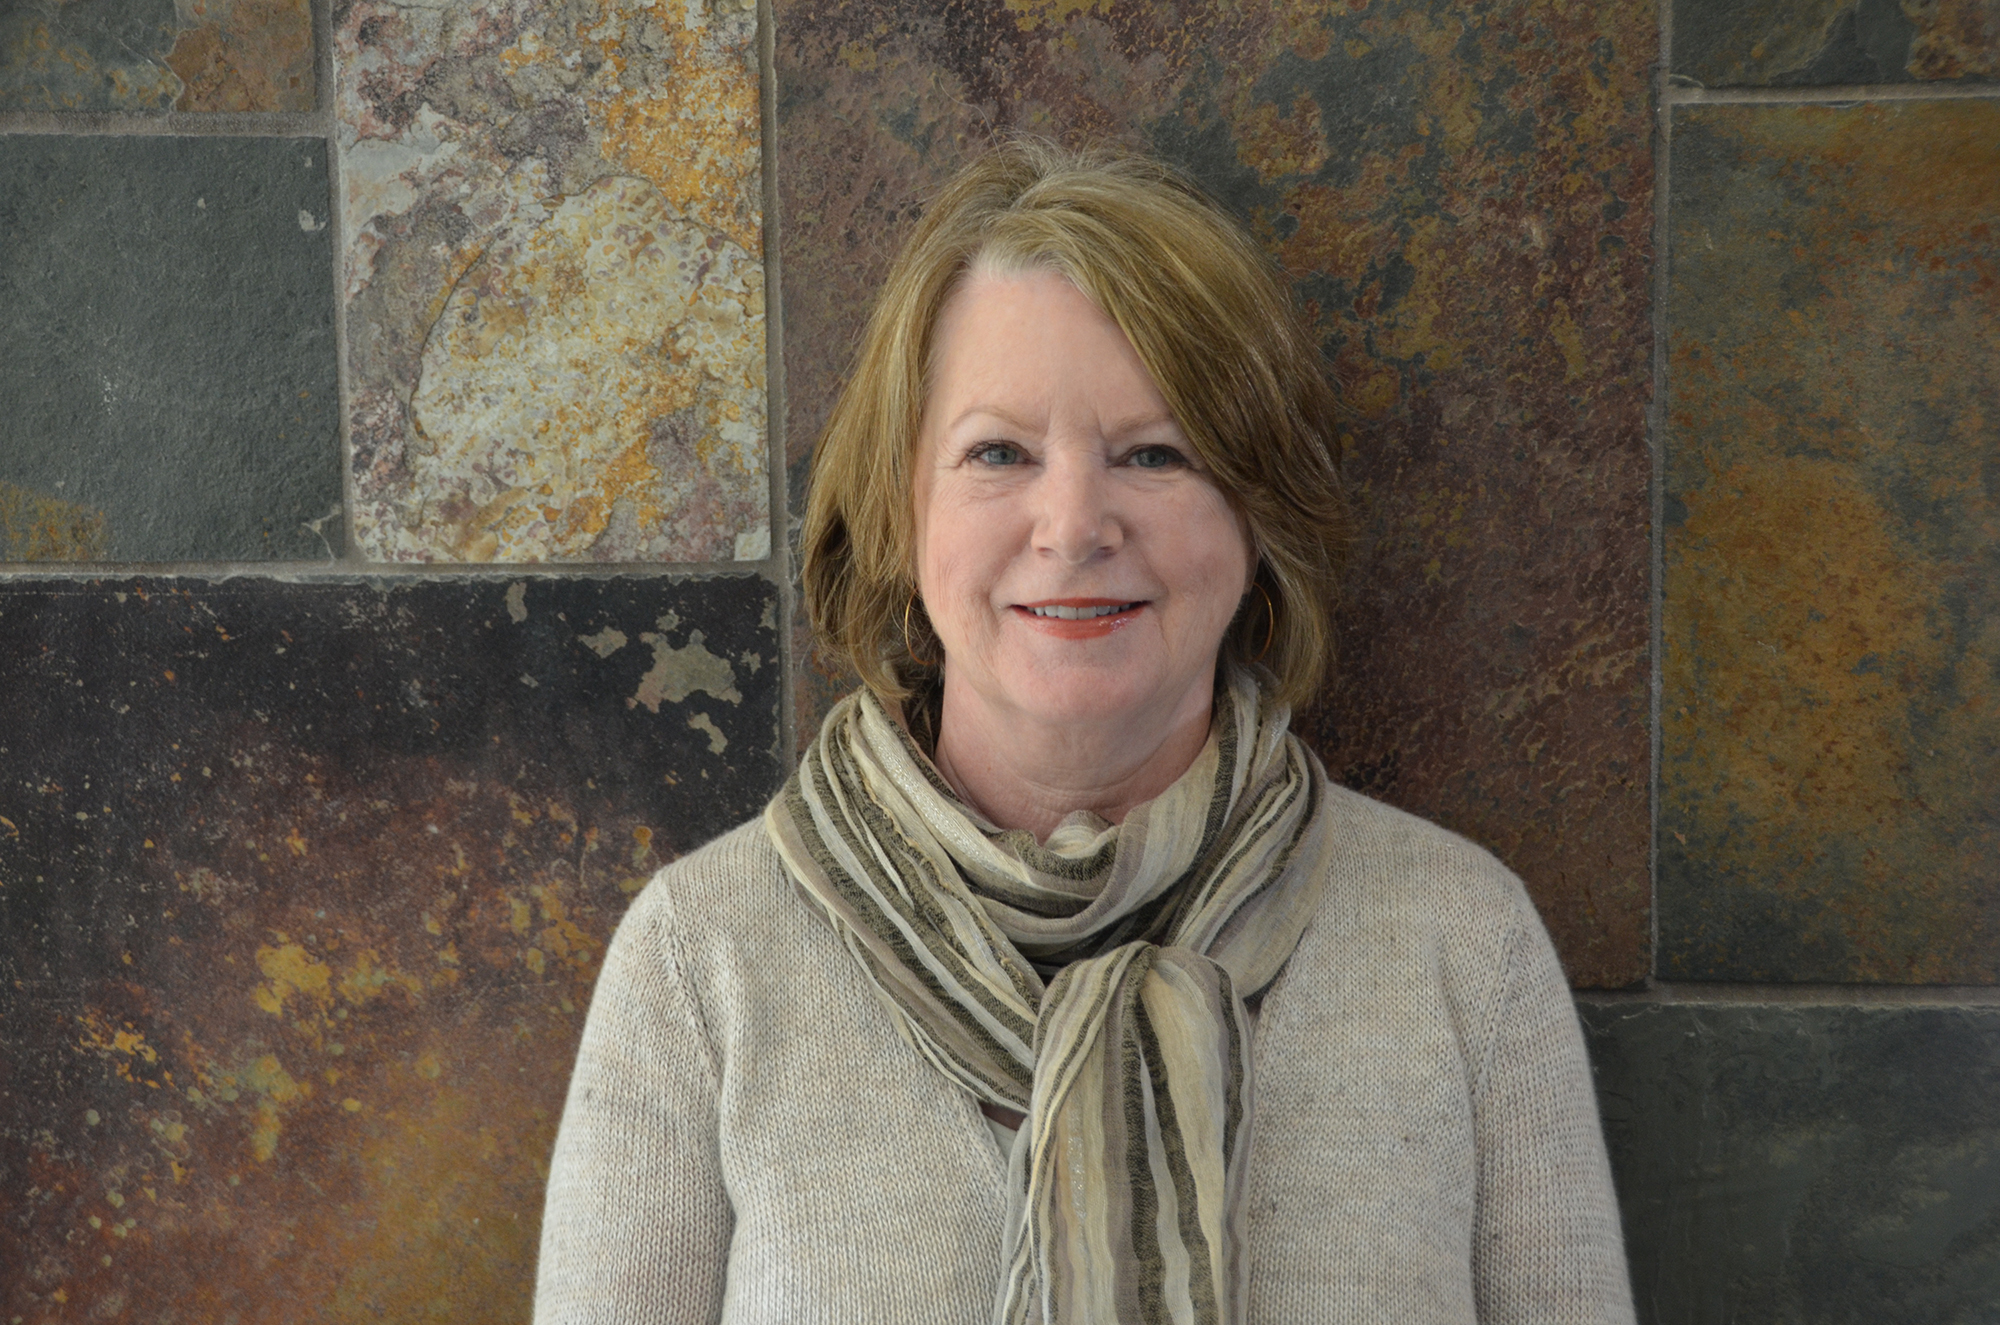 Board-certified chaplain Libby Grobmyer serves as co-president of the College of Pastoral Supervision and Psychotherapy.